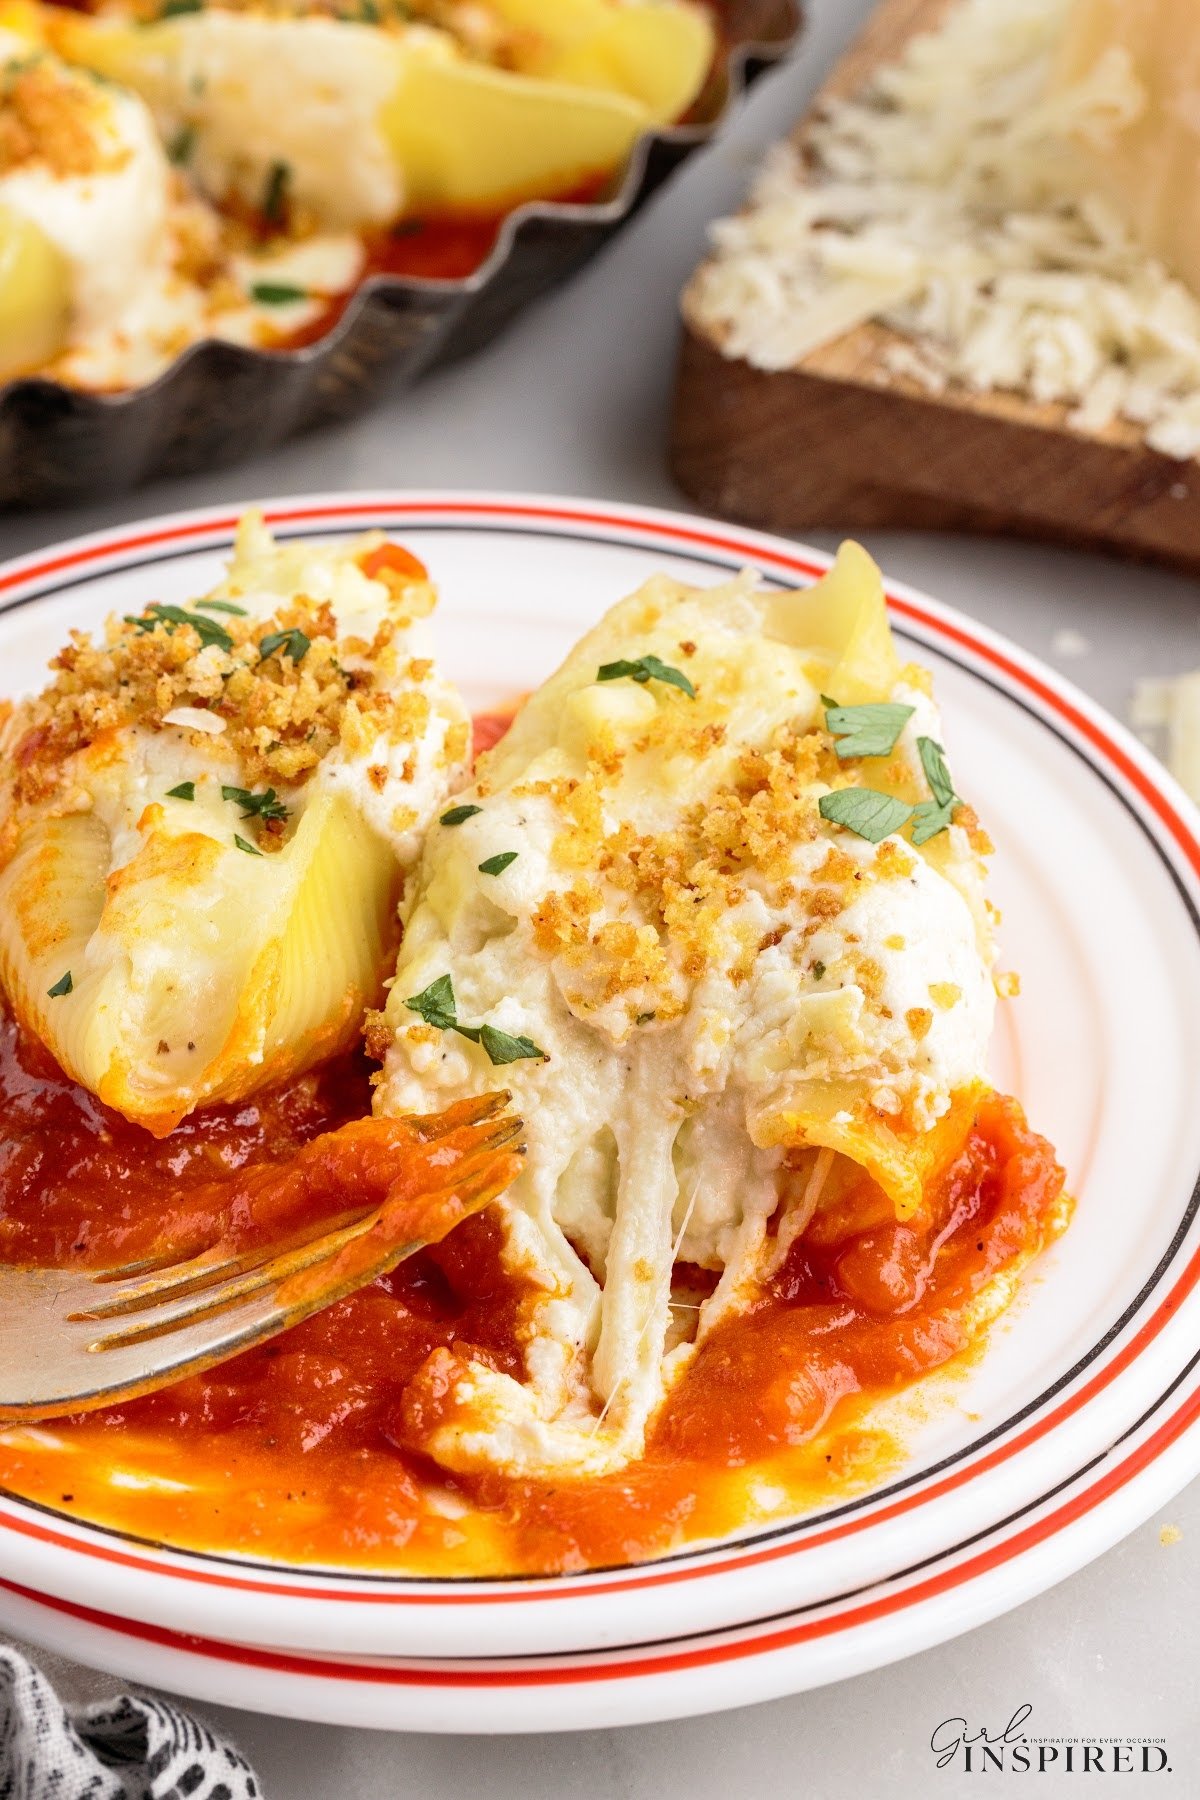 Giant Cheese Stuffed Shells olive garden copycat recipe is platted with shells in a marinara sauce.